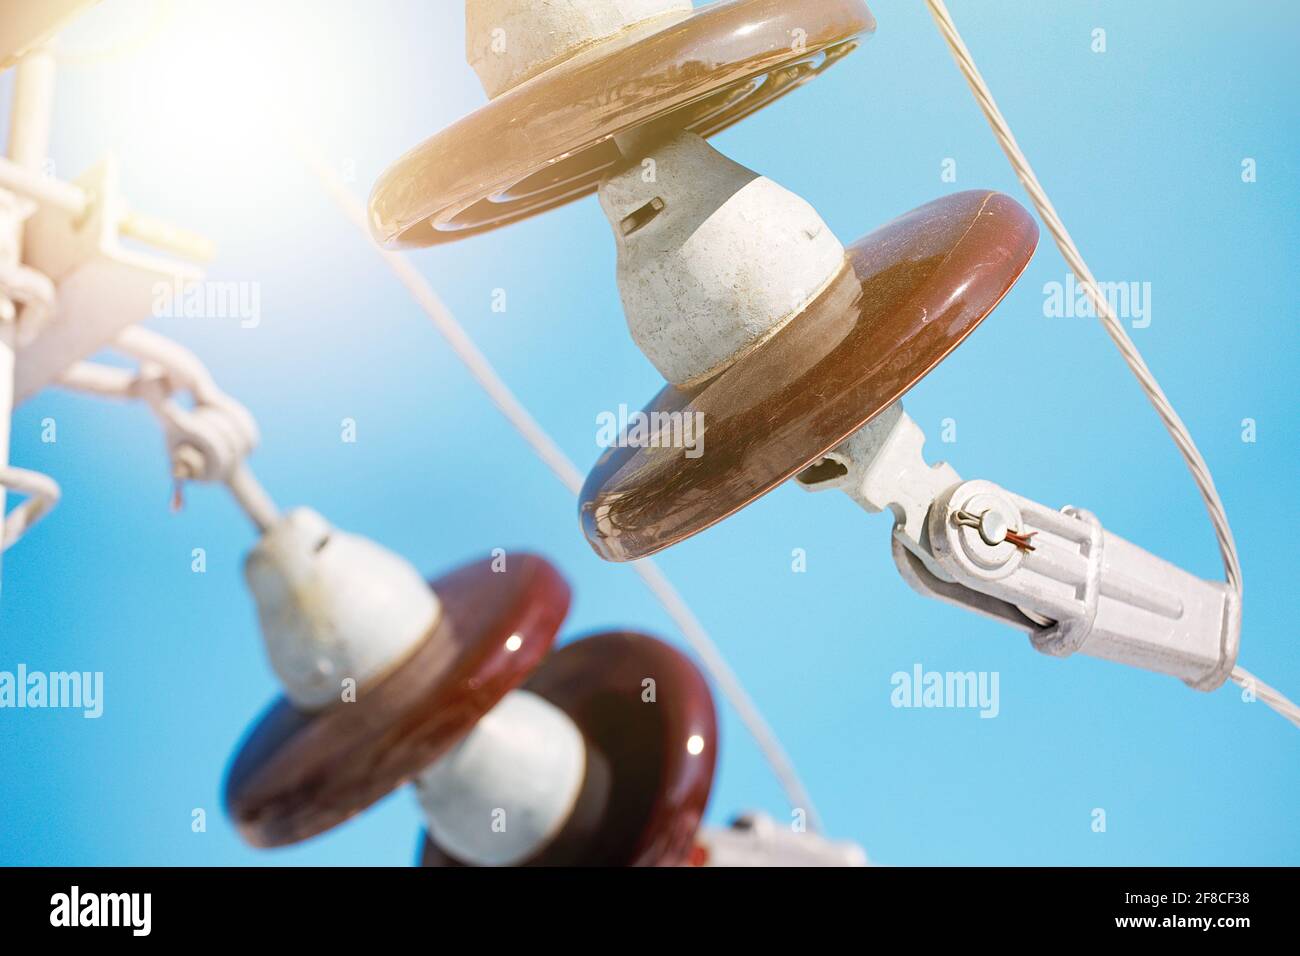 A ceramic suspended insulator hangs from a power line against a blue sky. Close-up. Stock Photo